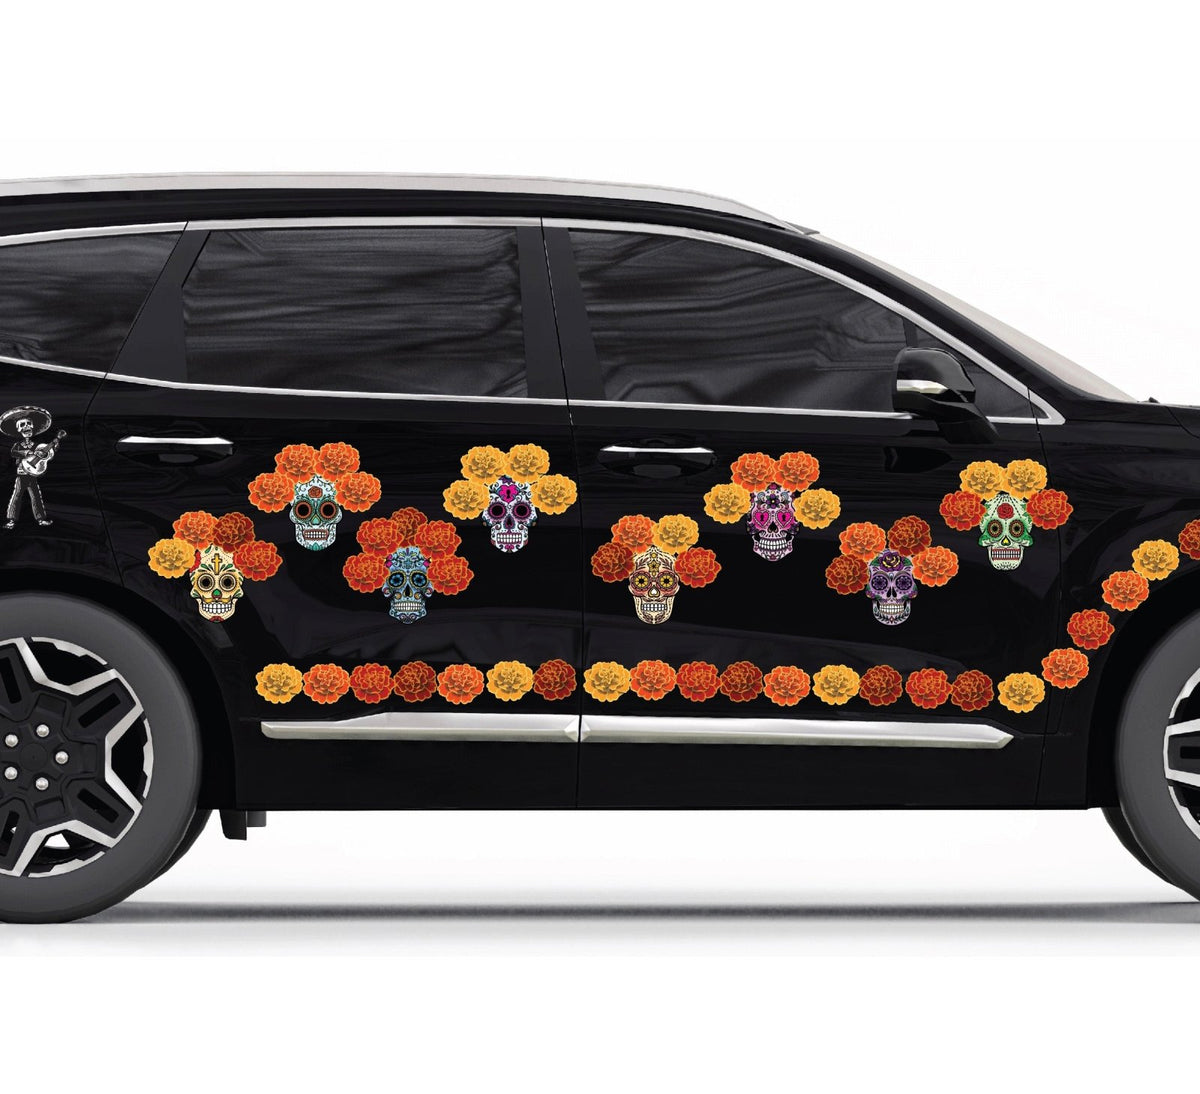 Day of the Dead themed decals for SUV.